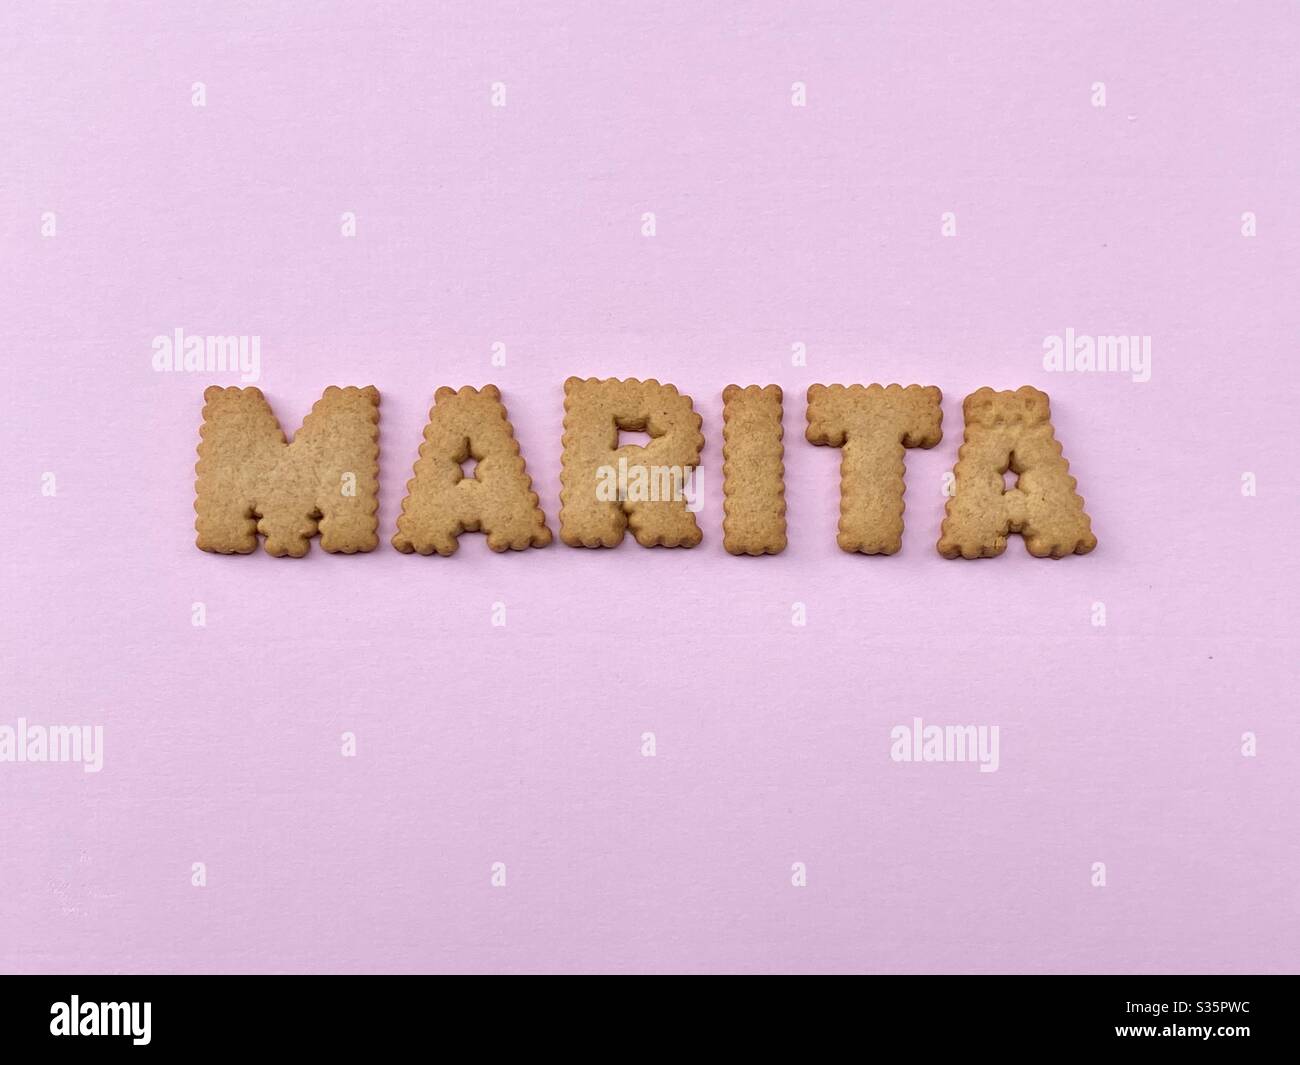 Marita, female given name composed with cookie letters over pink color Stock Photo